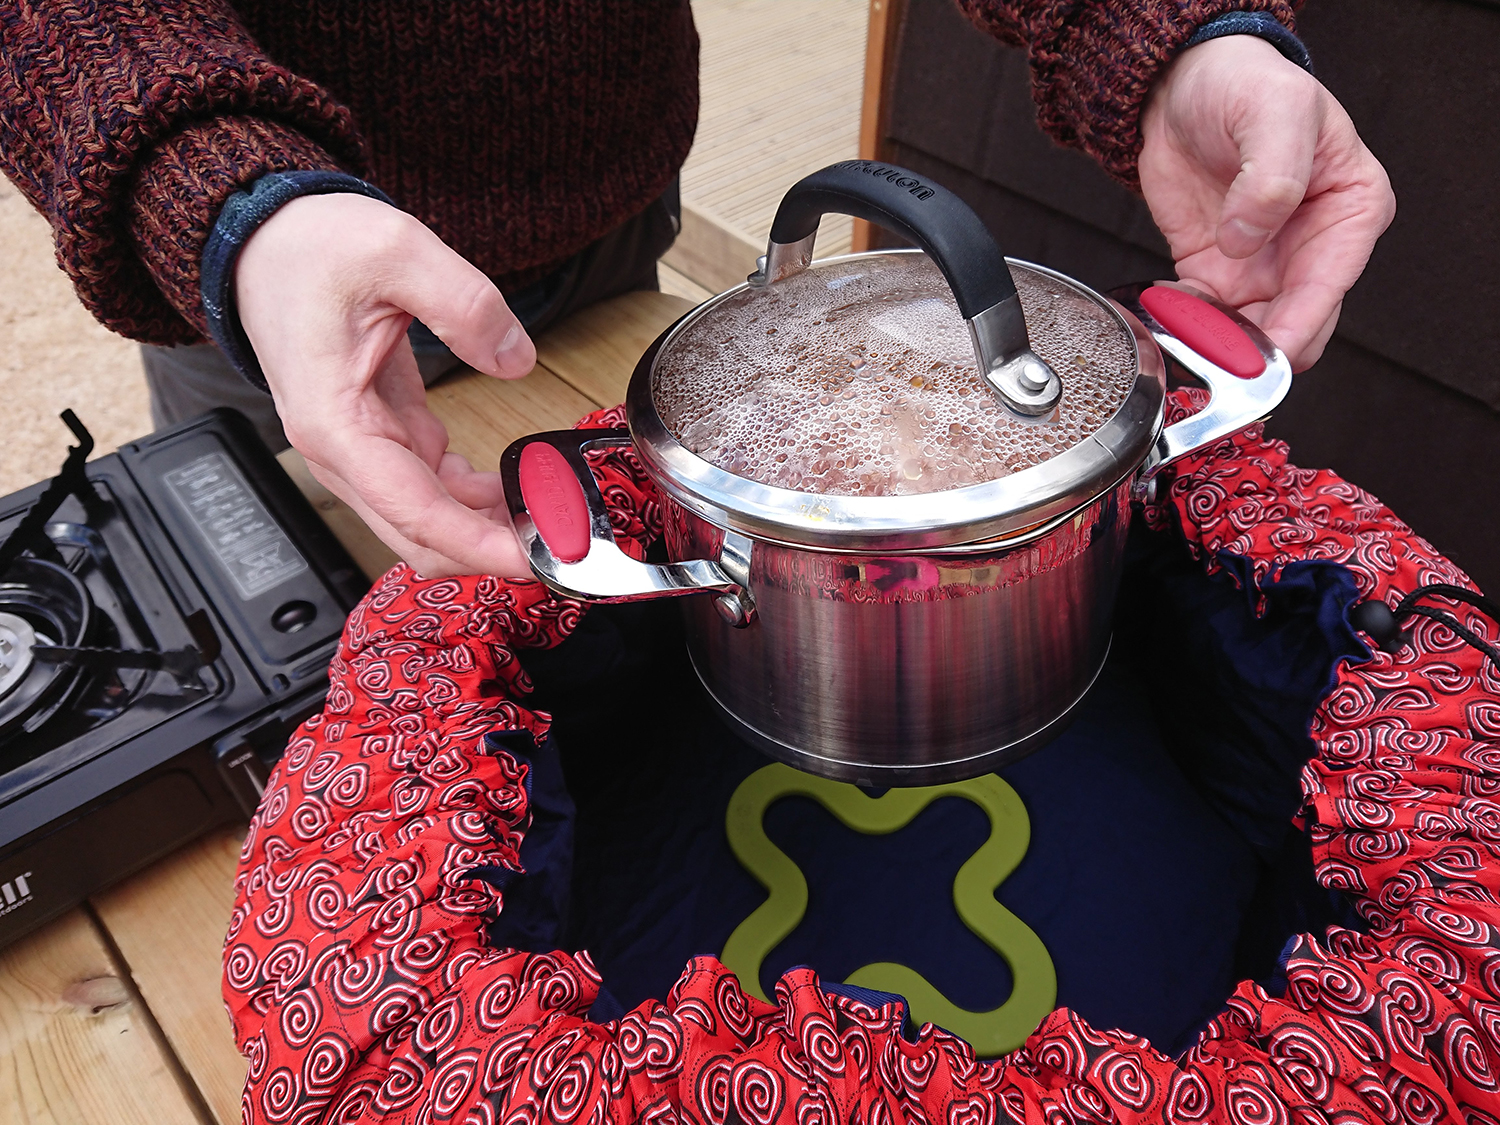 https://www.campingwithstyle.co.uk/wp-content/uploads/2018/04/wonderbag-camp-slowcooker-review01.jpg